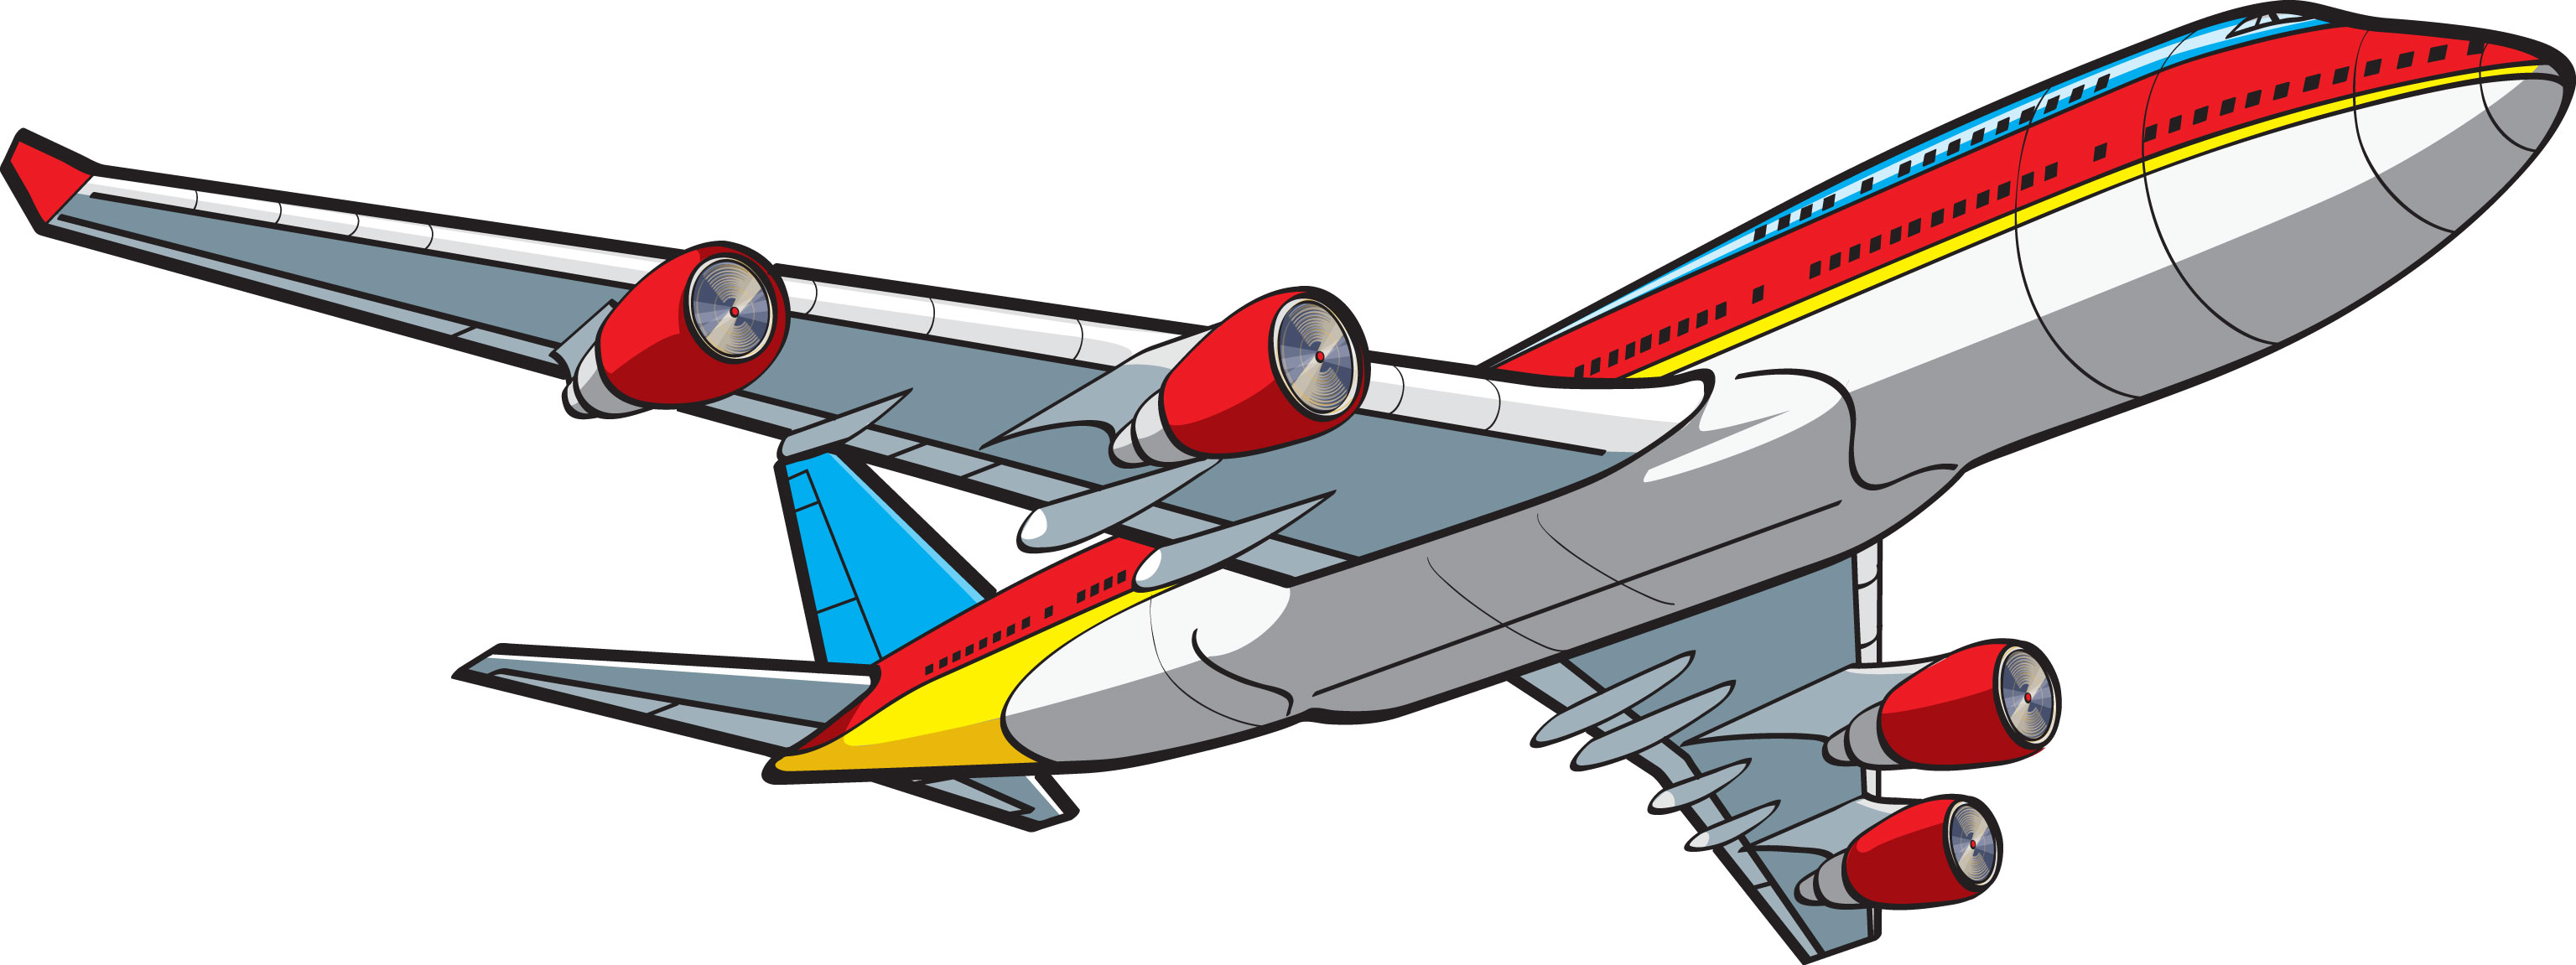 free clipart pictures of airplanes - photo #40